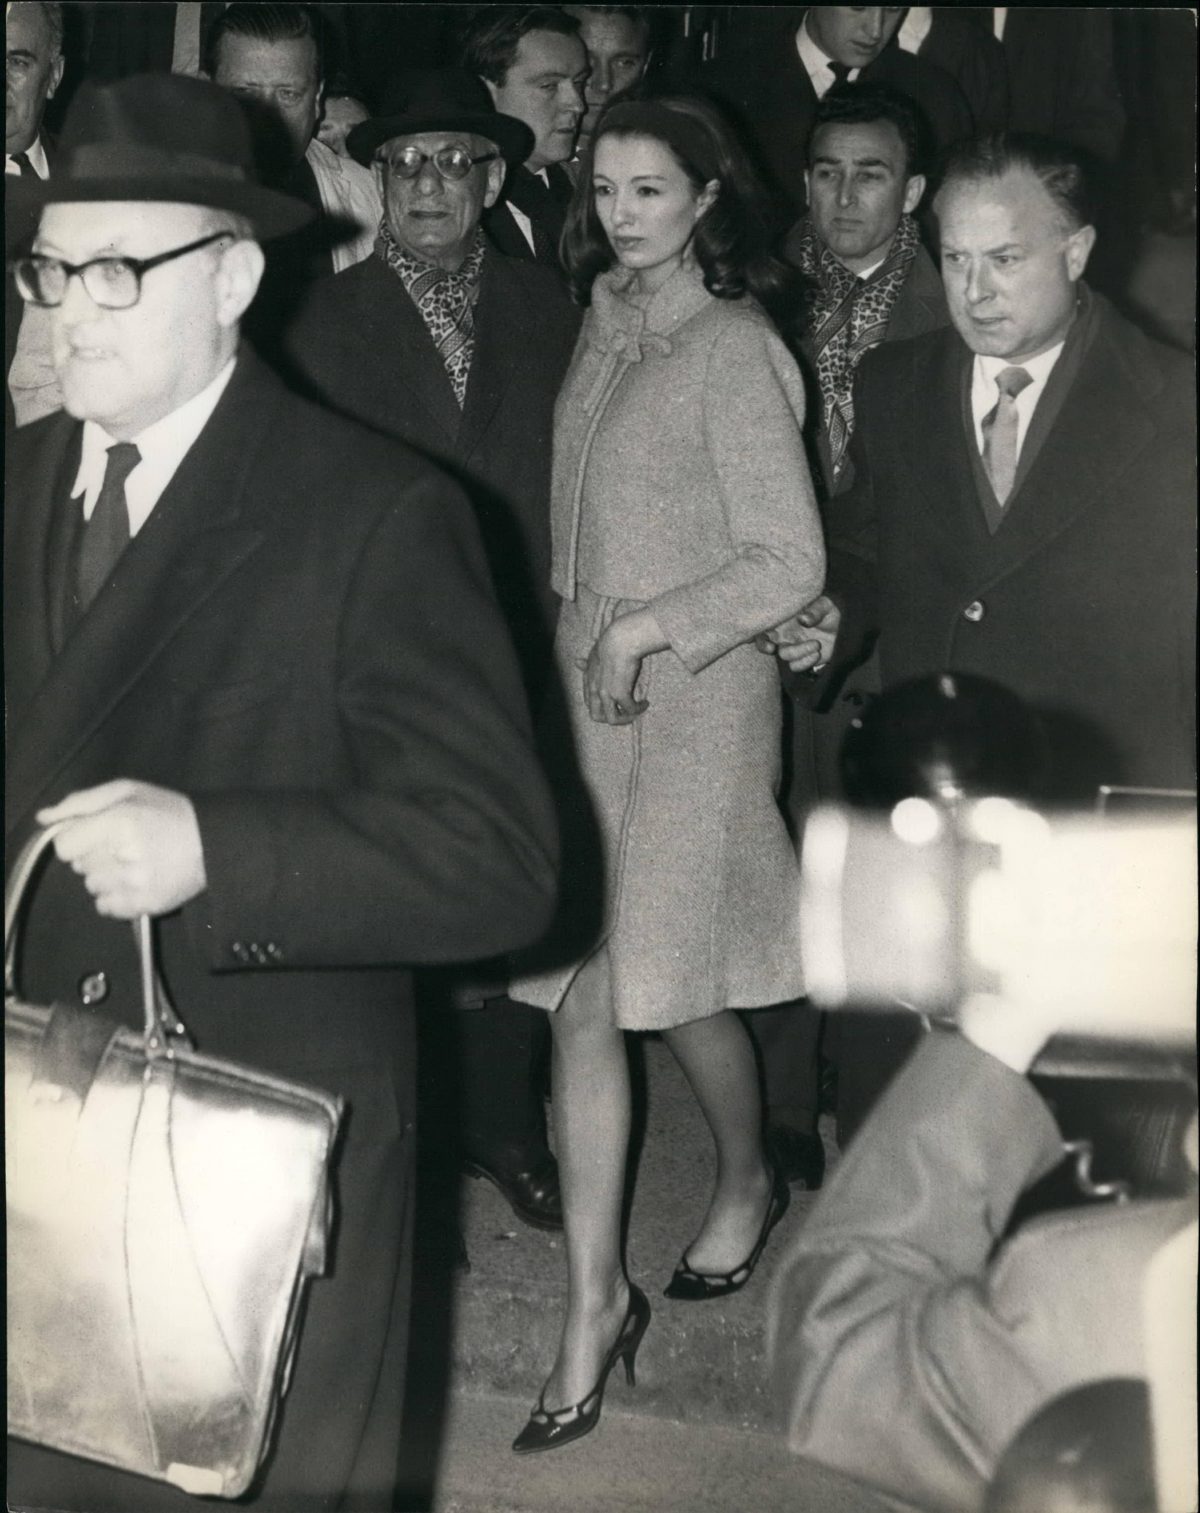 Dec. 12, 1963 - Christine Keeler trail at the Old Bailey: The trial in ...